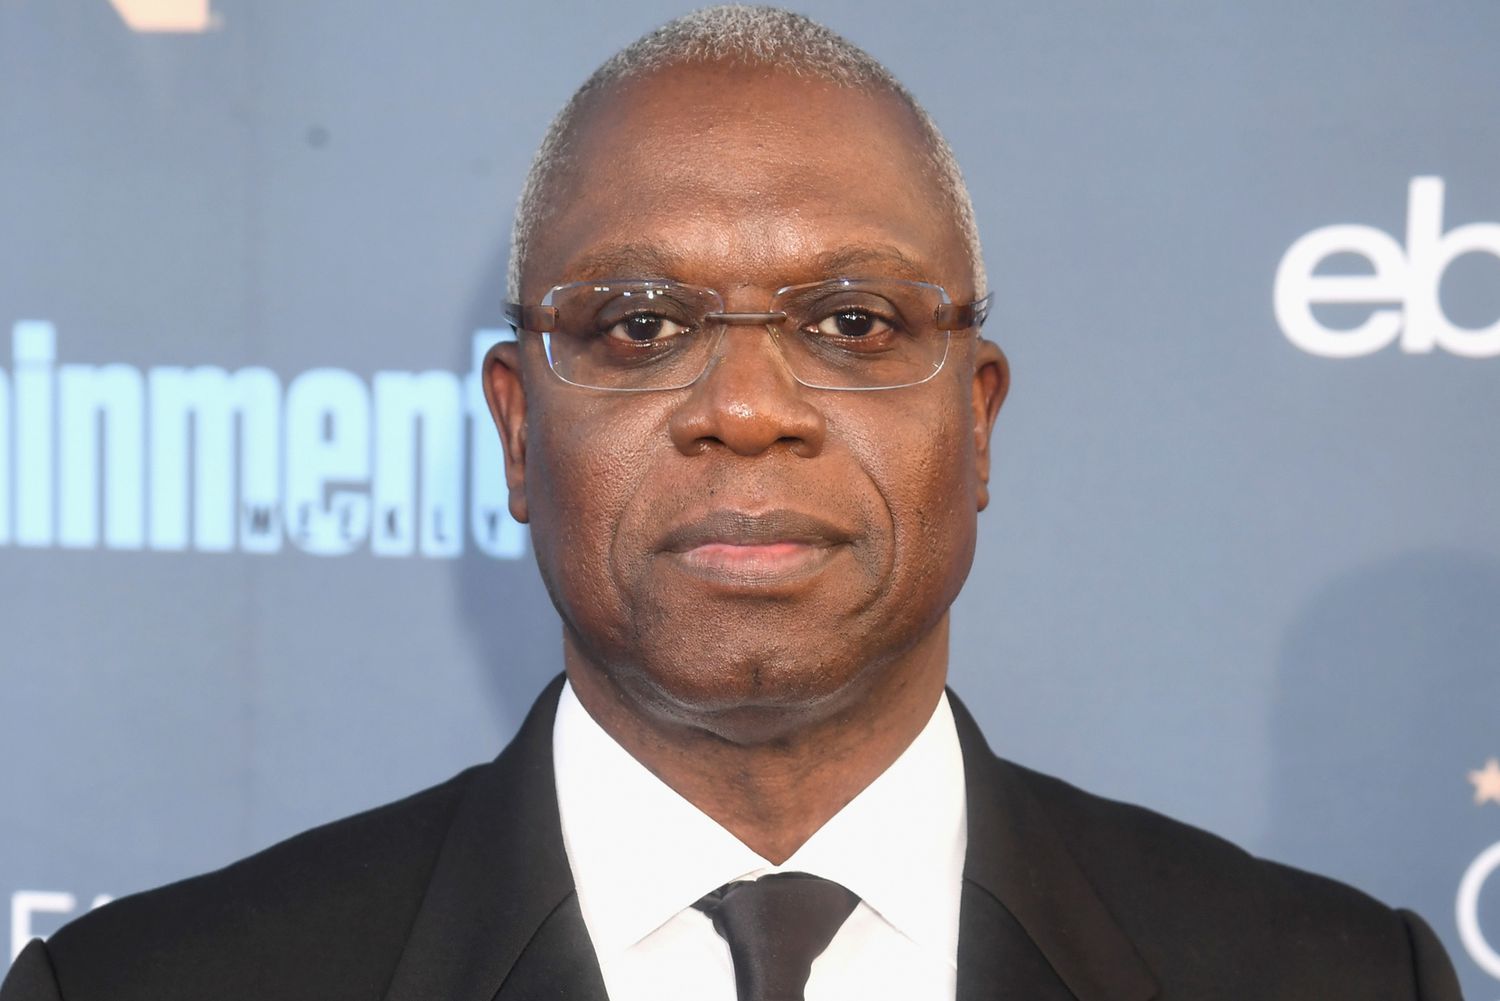 Andre Braugher, ‘Brooklyn Nine-Nine’ and ‘Homicide’ Actor, Died From Lung Cancer, Spokesperson Says